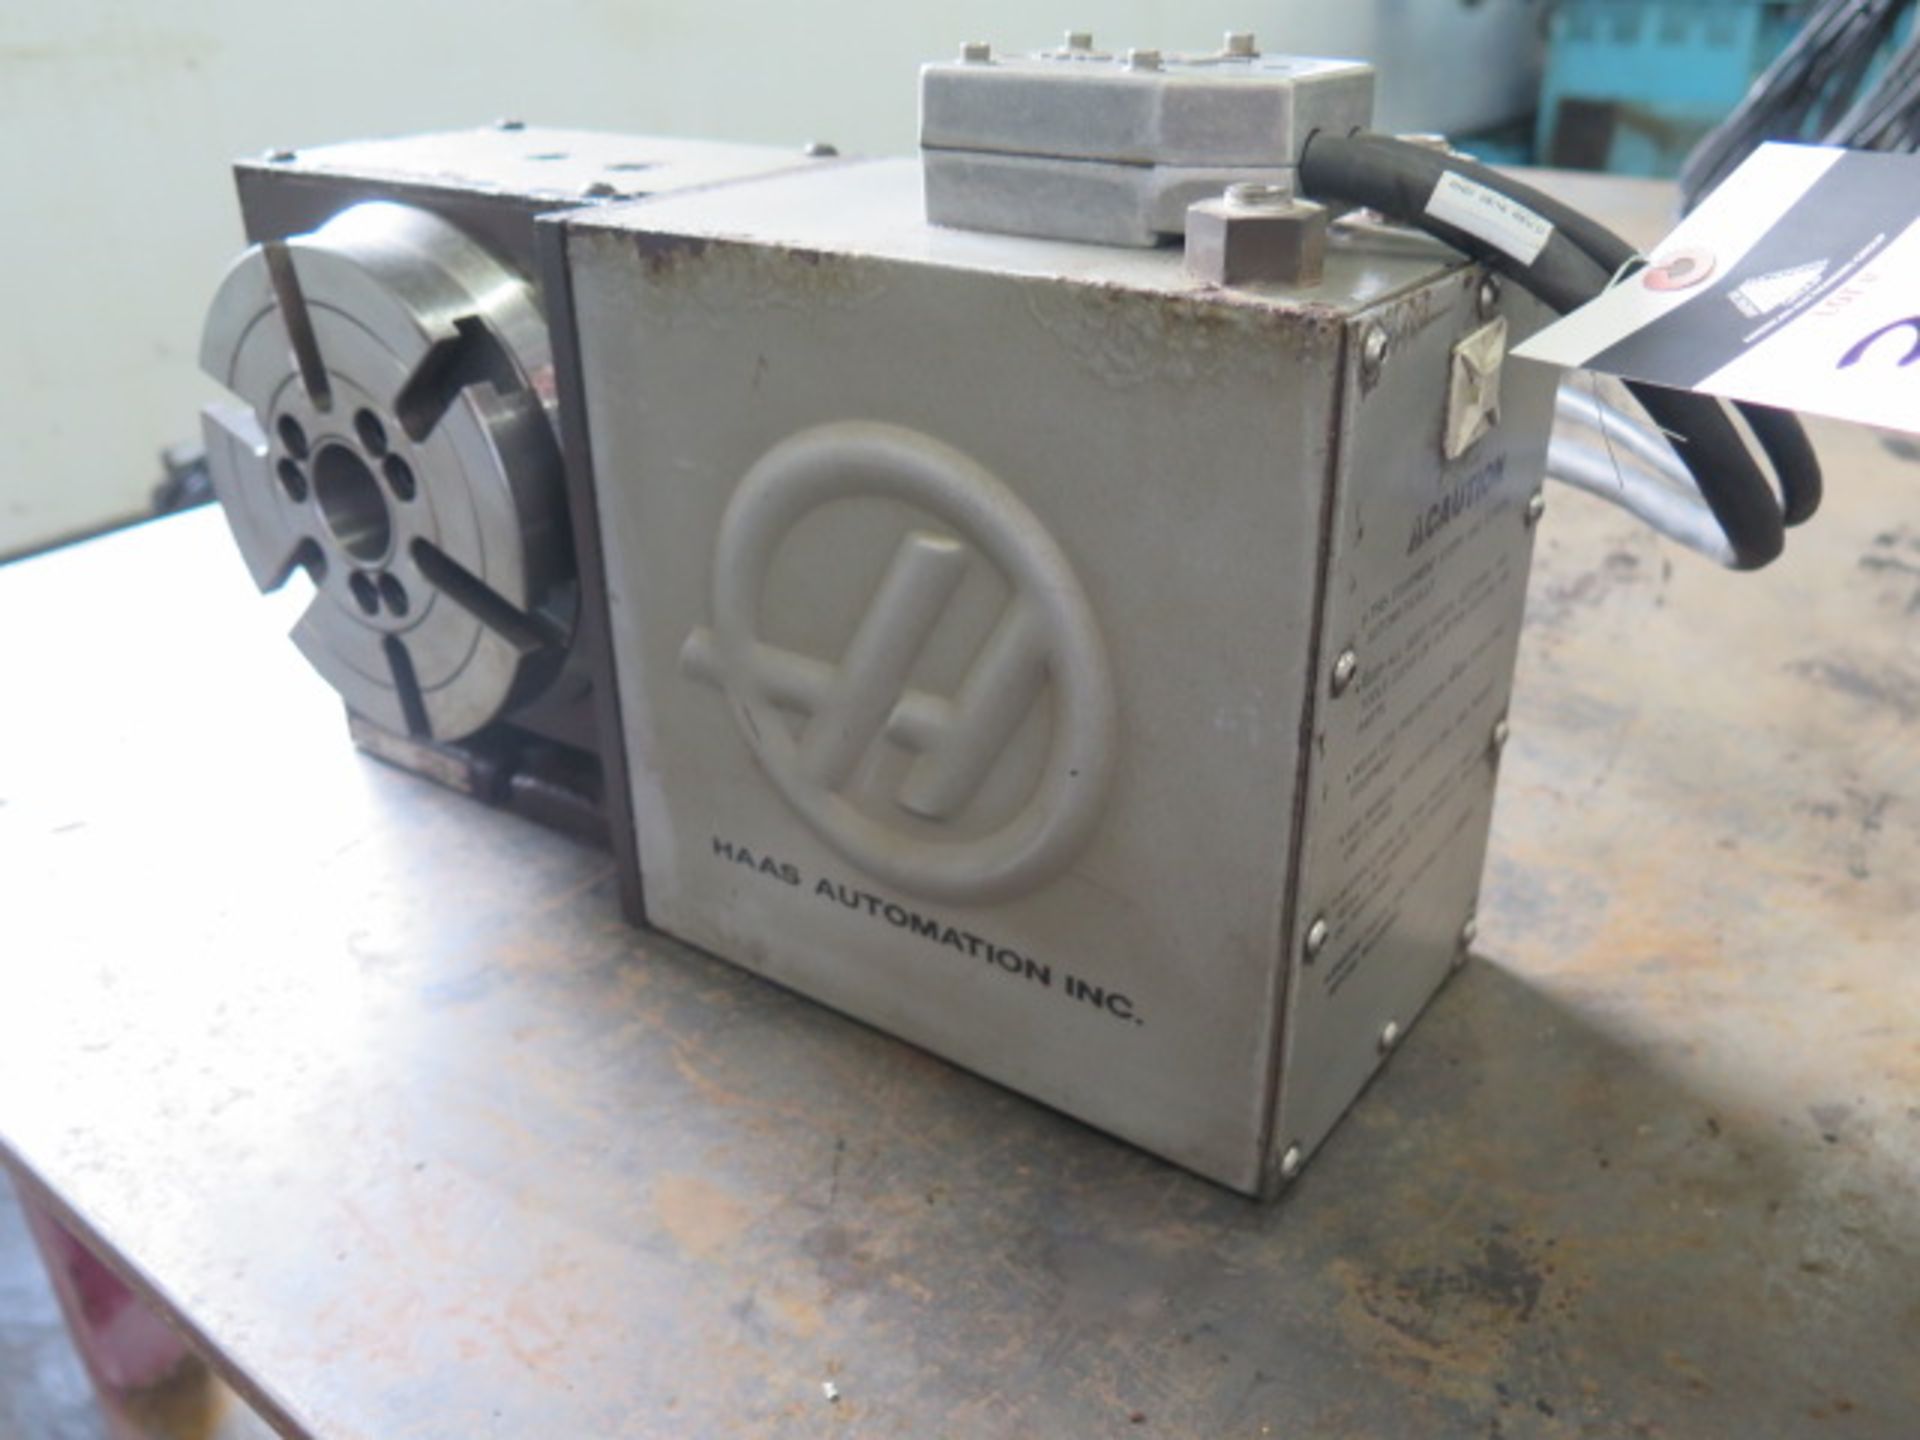 Haas SHRT160H 6” 4th Axis Rotary Indexer s/n 165176 - Image 3 of 8